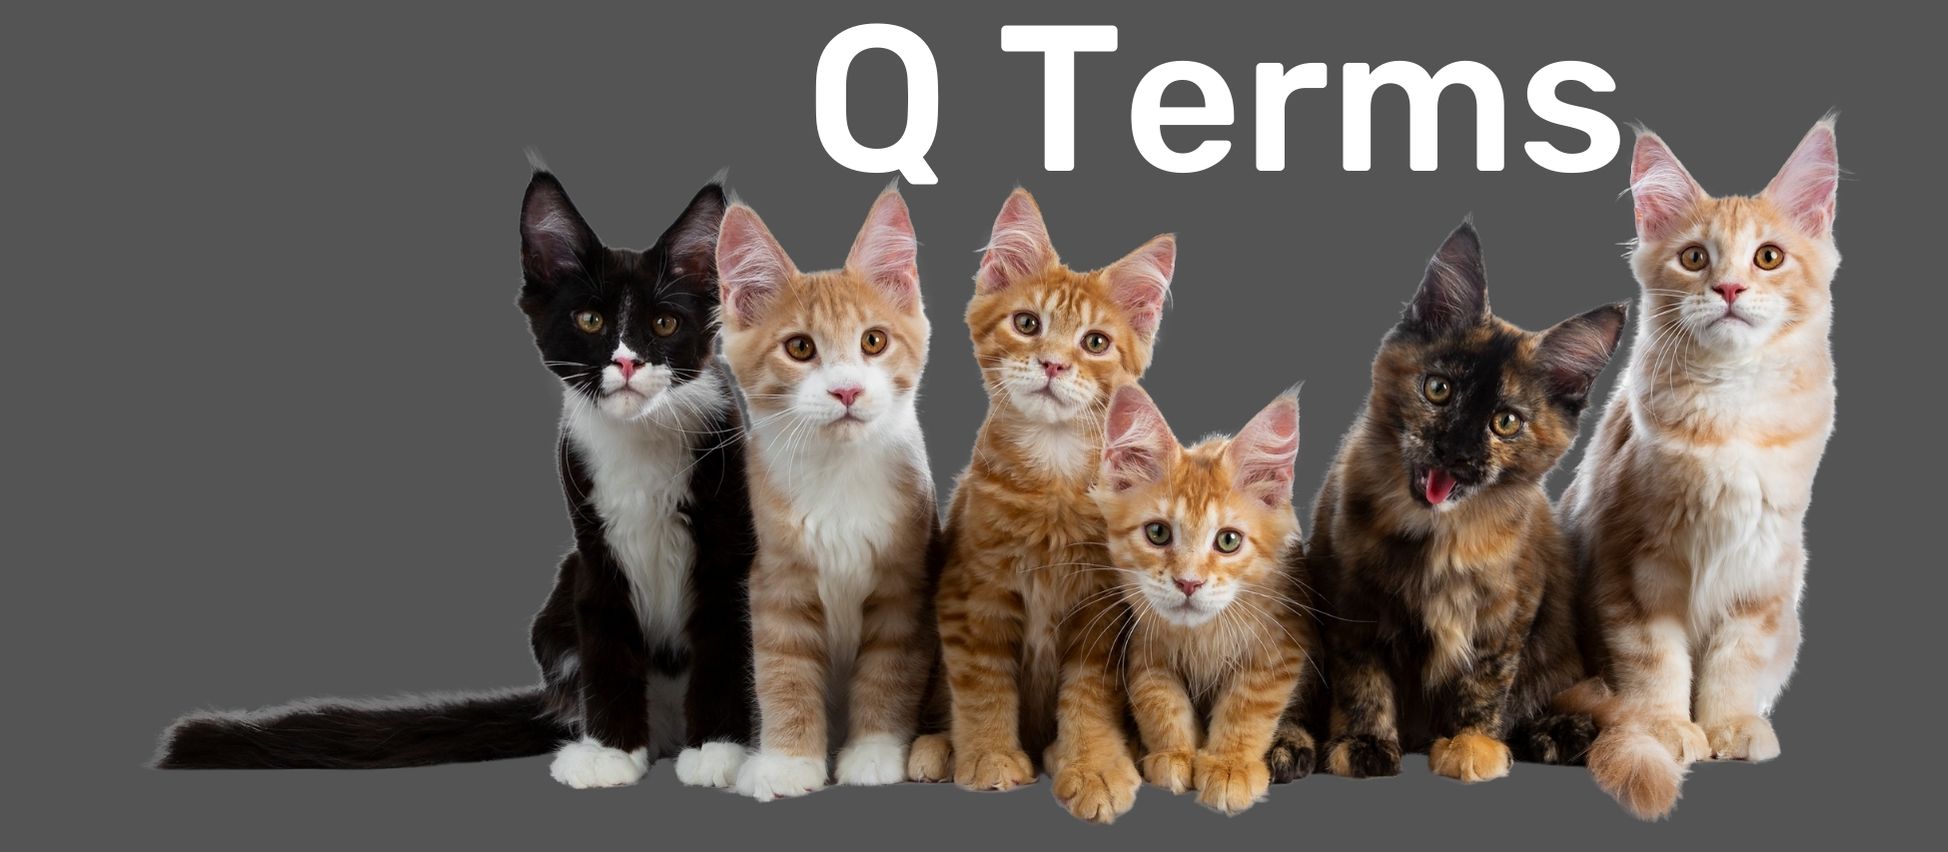 Group of six cats in front of a gray background with text reading 'Q Terms' at the top to indicate a new section of the glossary